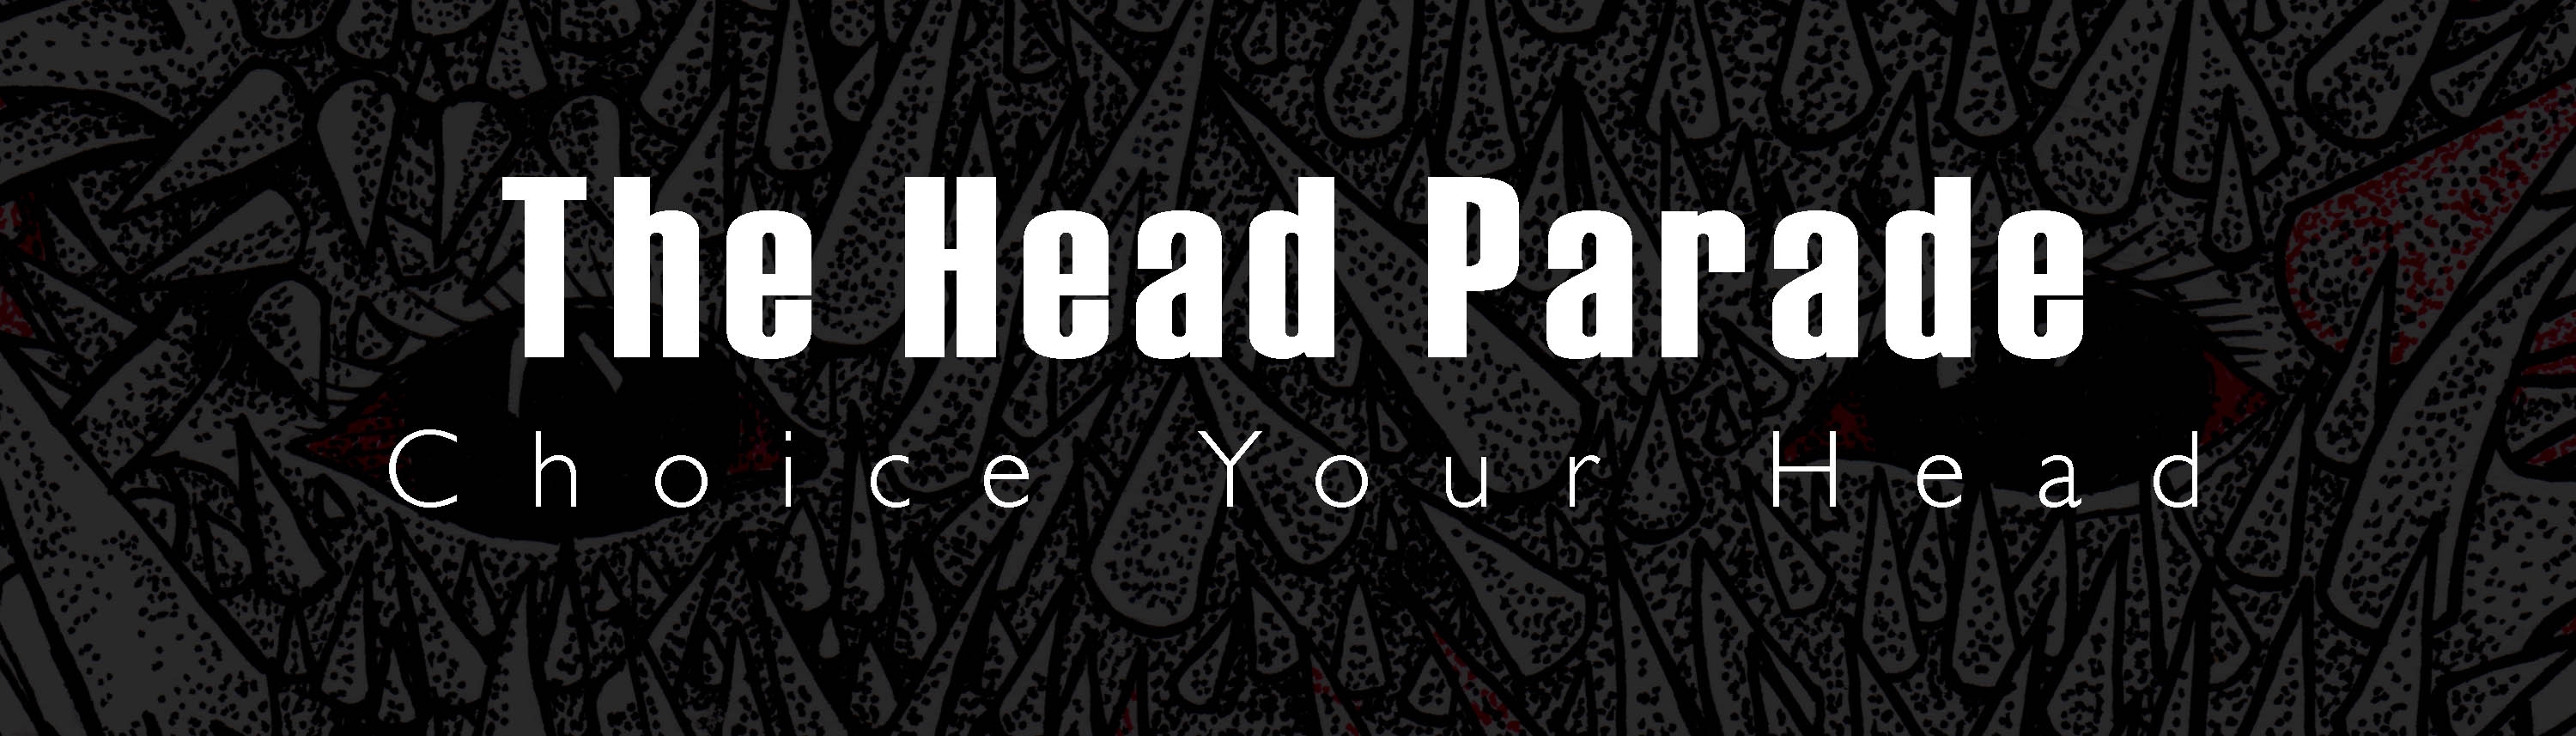 The Head Parade banner